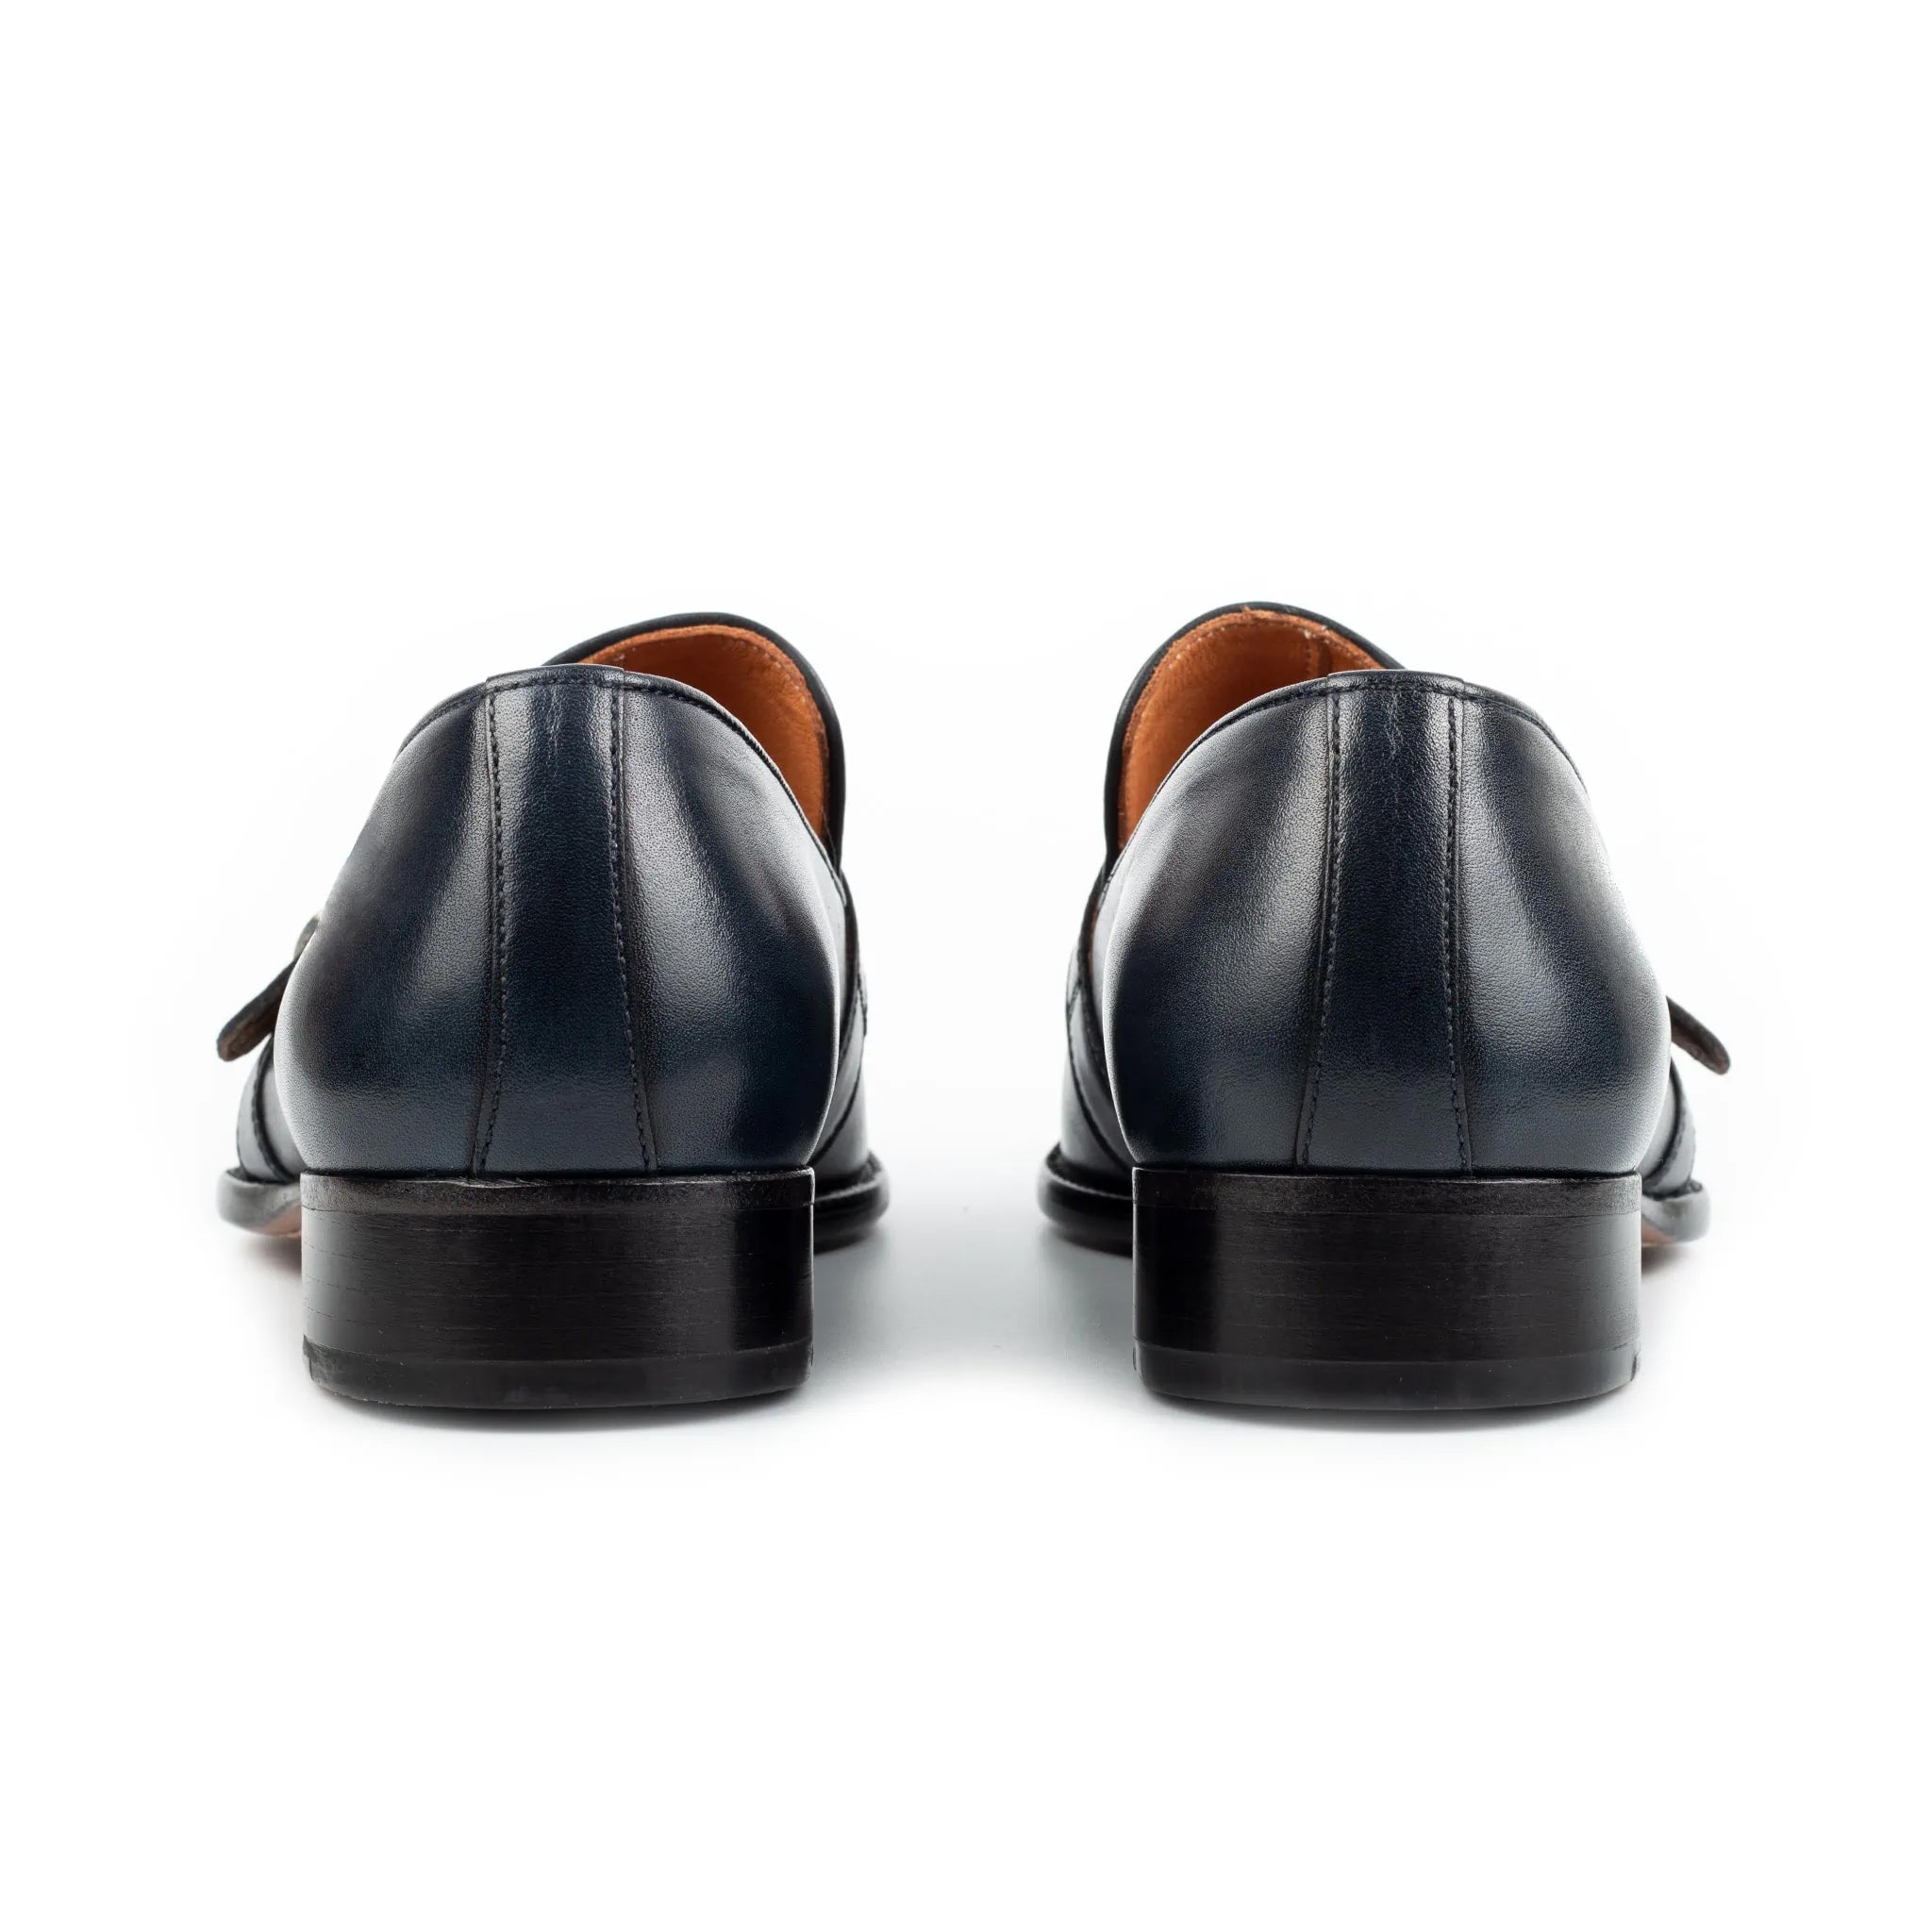 Midnight Single Monk Strap Men's Leather Shoes